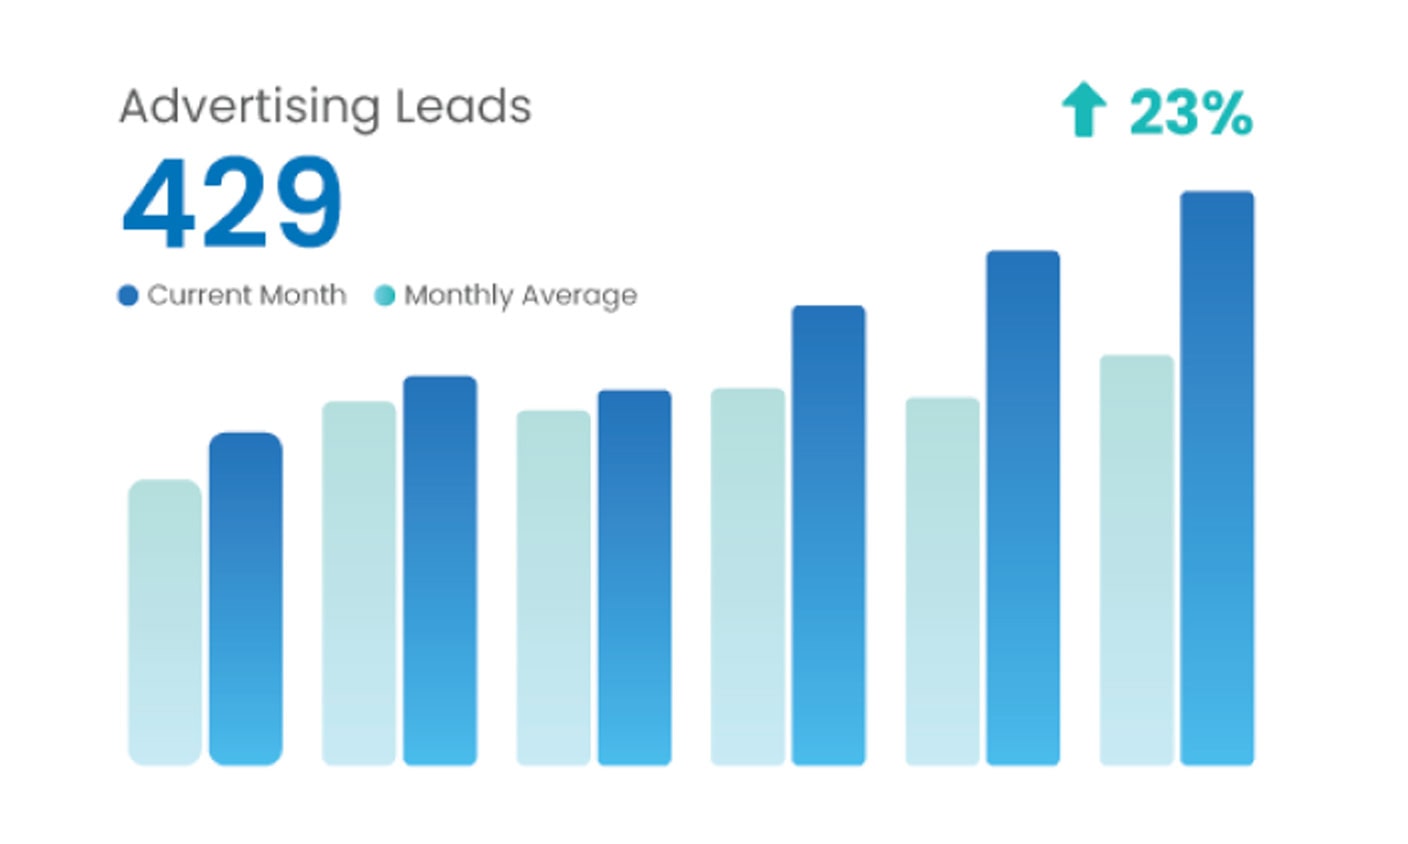 Bar chart showing 23% increase in advertising leads.